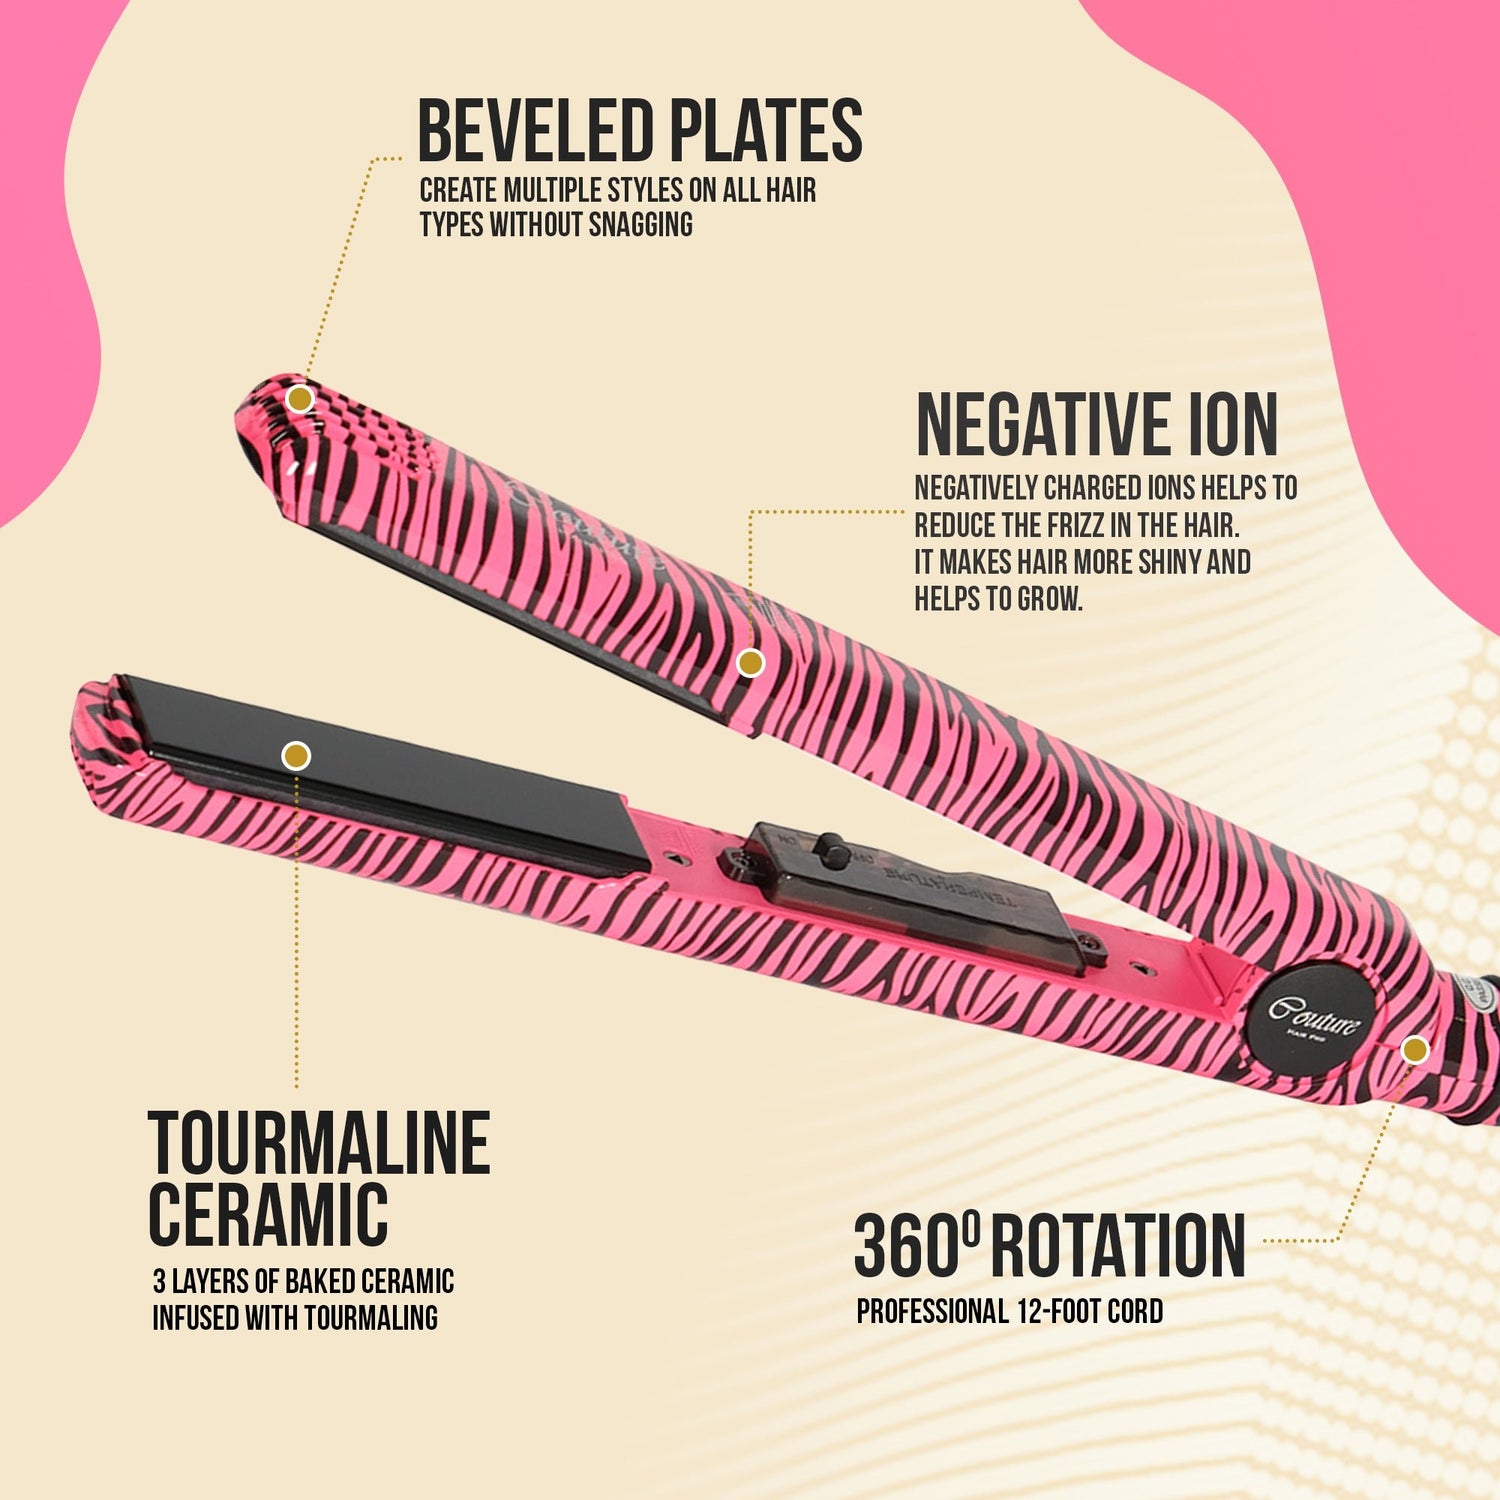 Couture Hair Pro Classic Hair Straightener 1'' - Pink Zebra - Couture Hair Pro